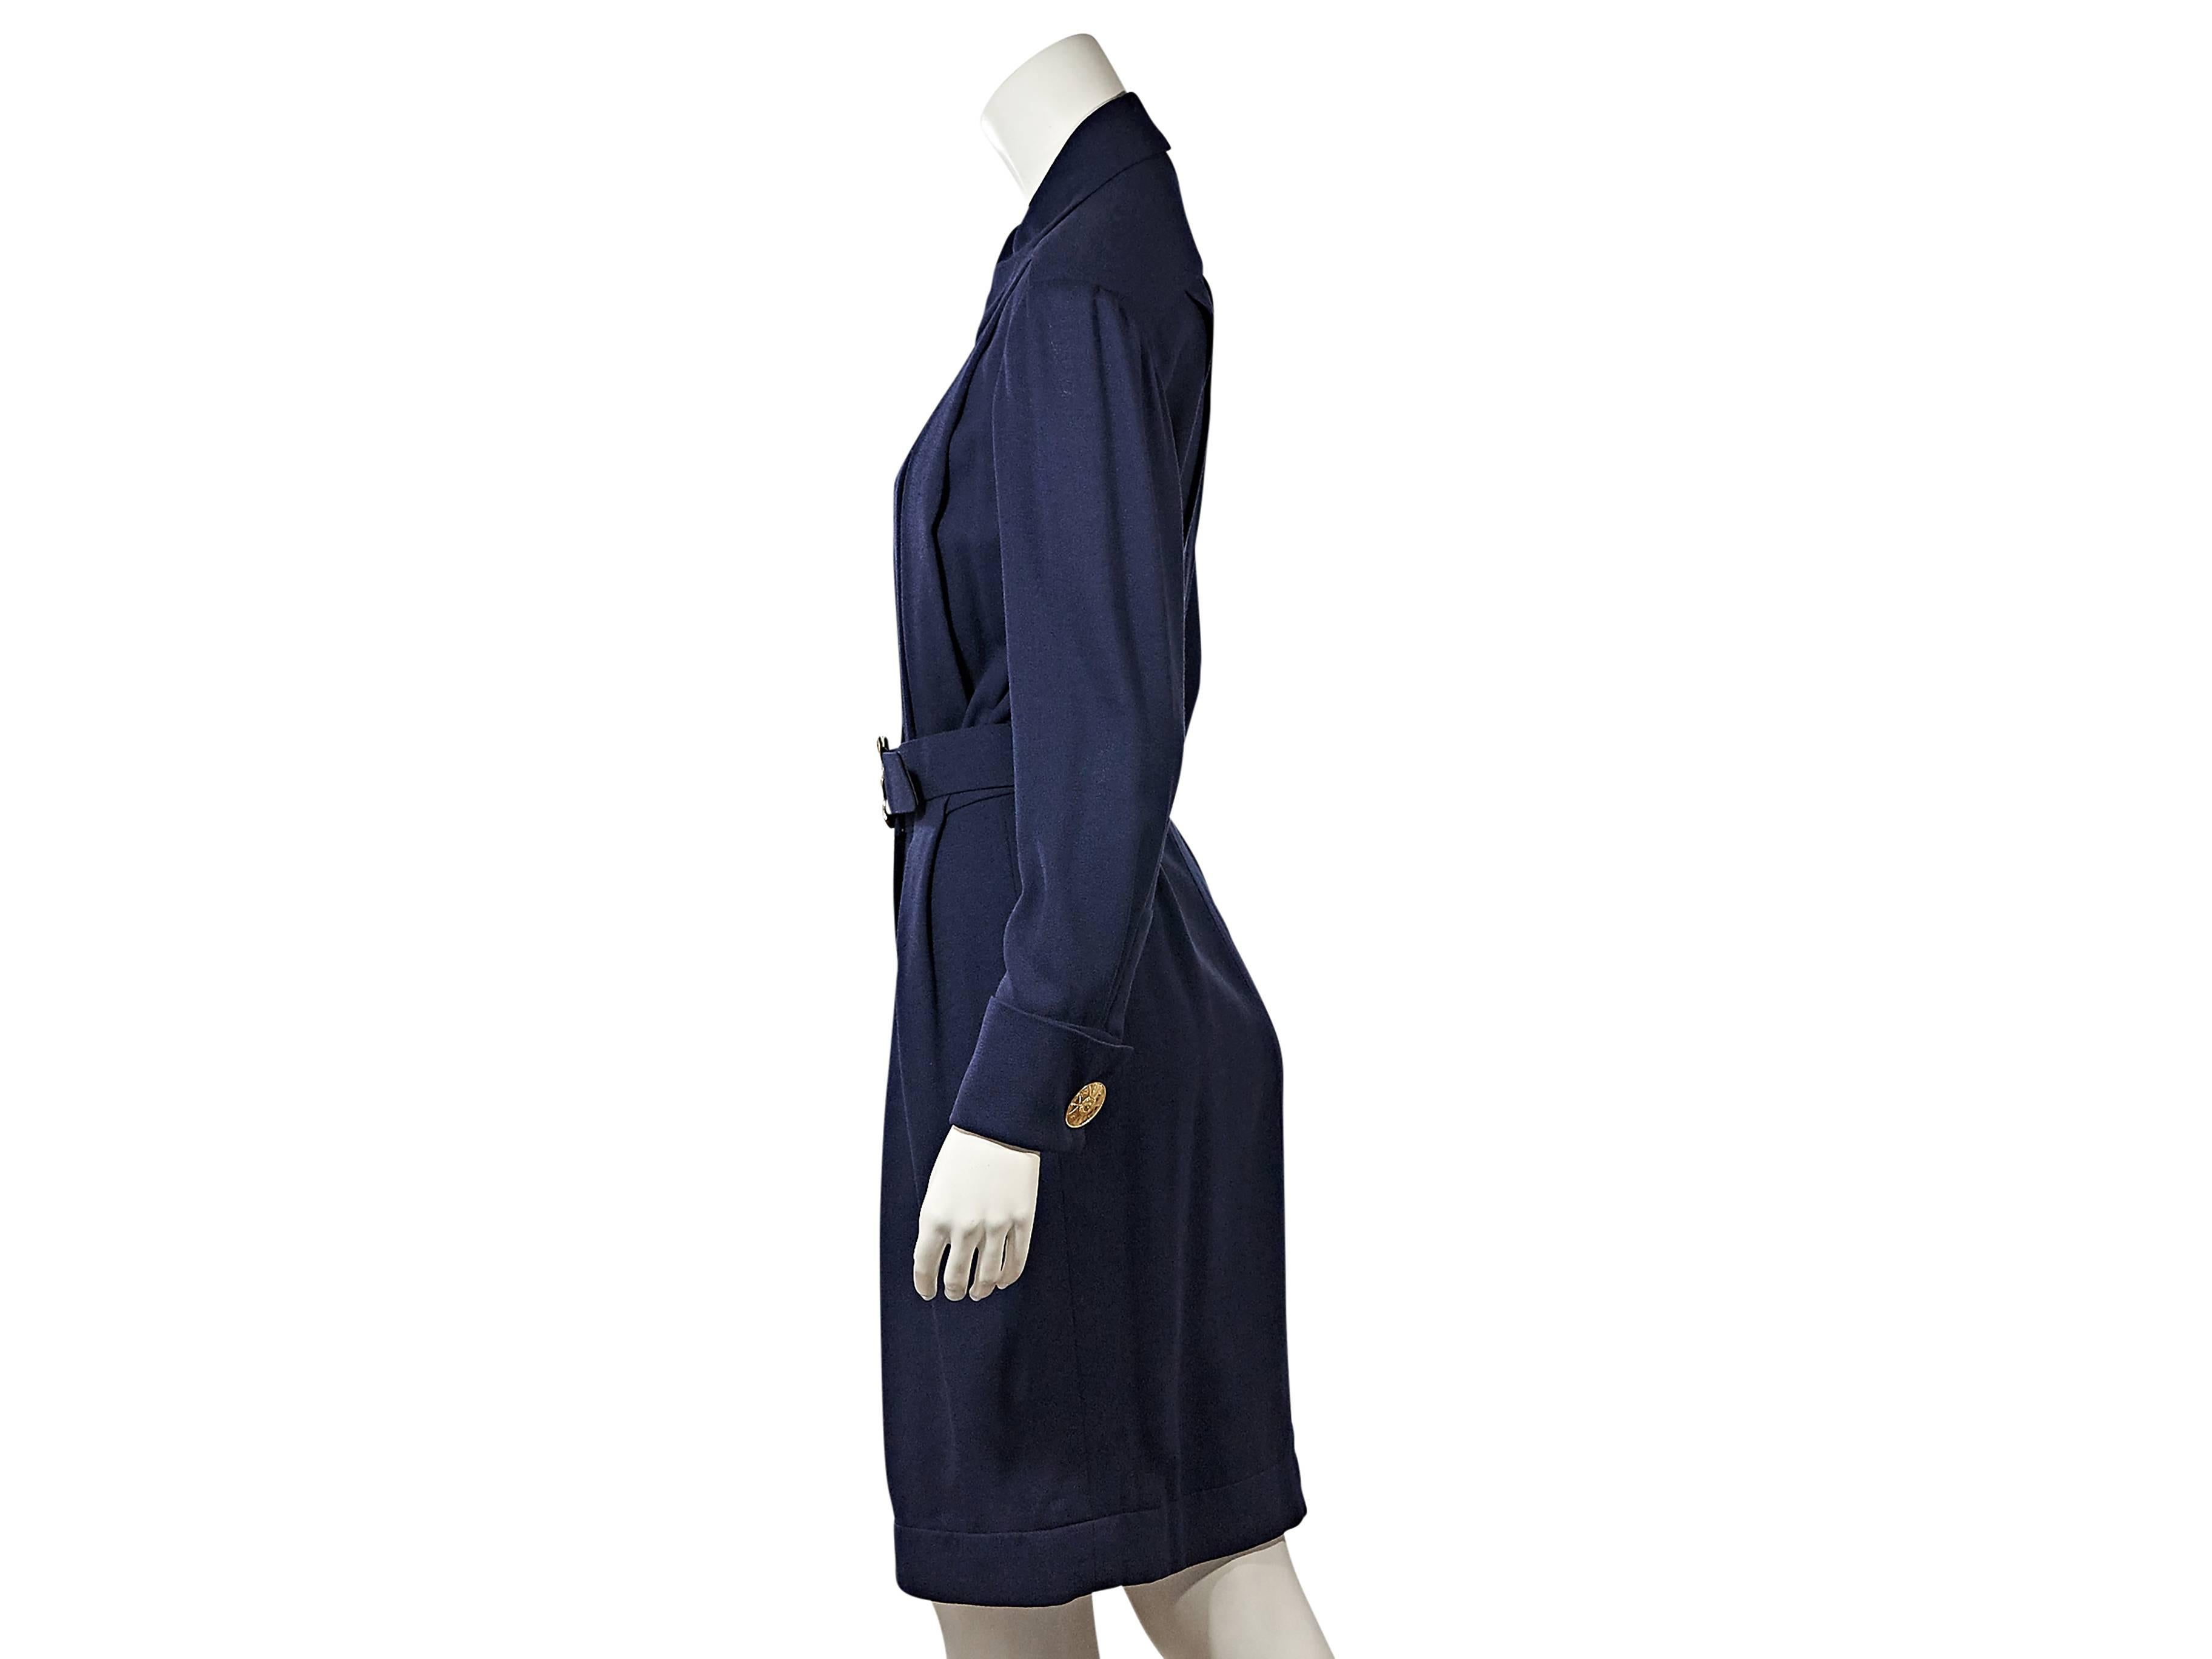 Product details:  ﻿Vintage navy pleated dress by Chanel.  Spread collar.  Long sleeves.  French cuffs.  Button-front closure.  Adjustable belted waist.  
Condition: Very good. 